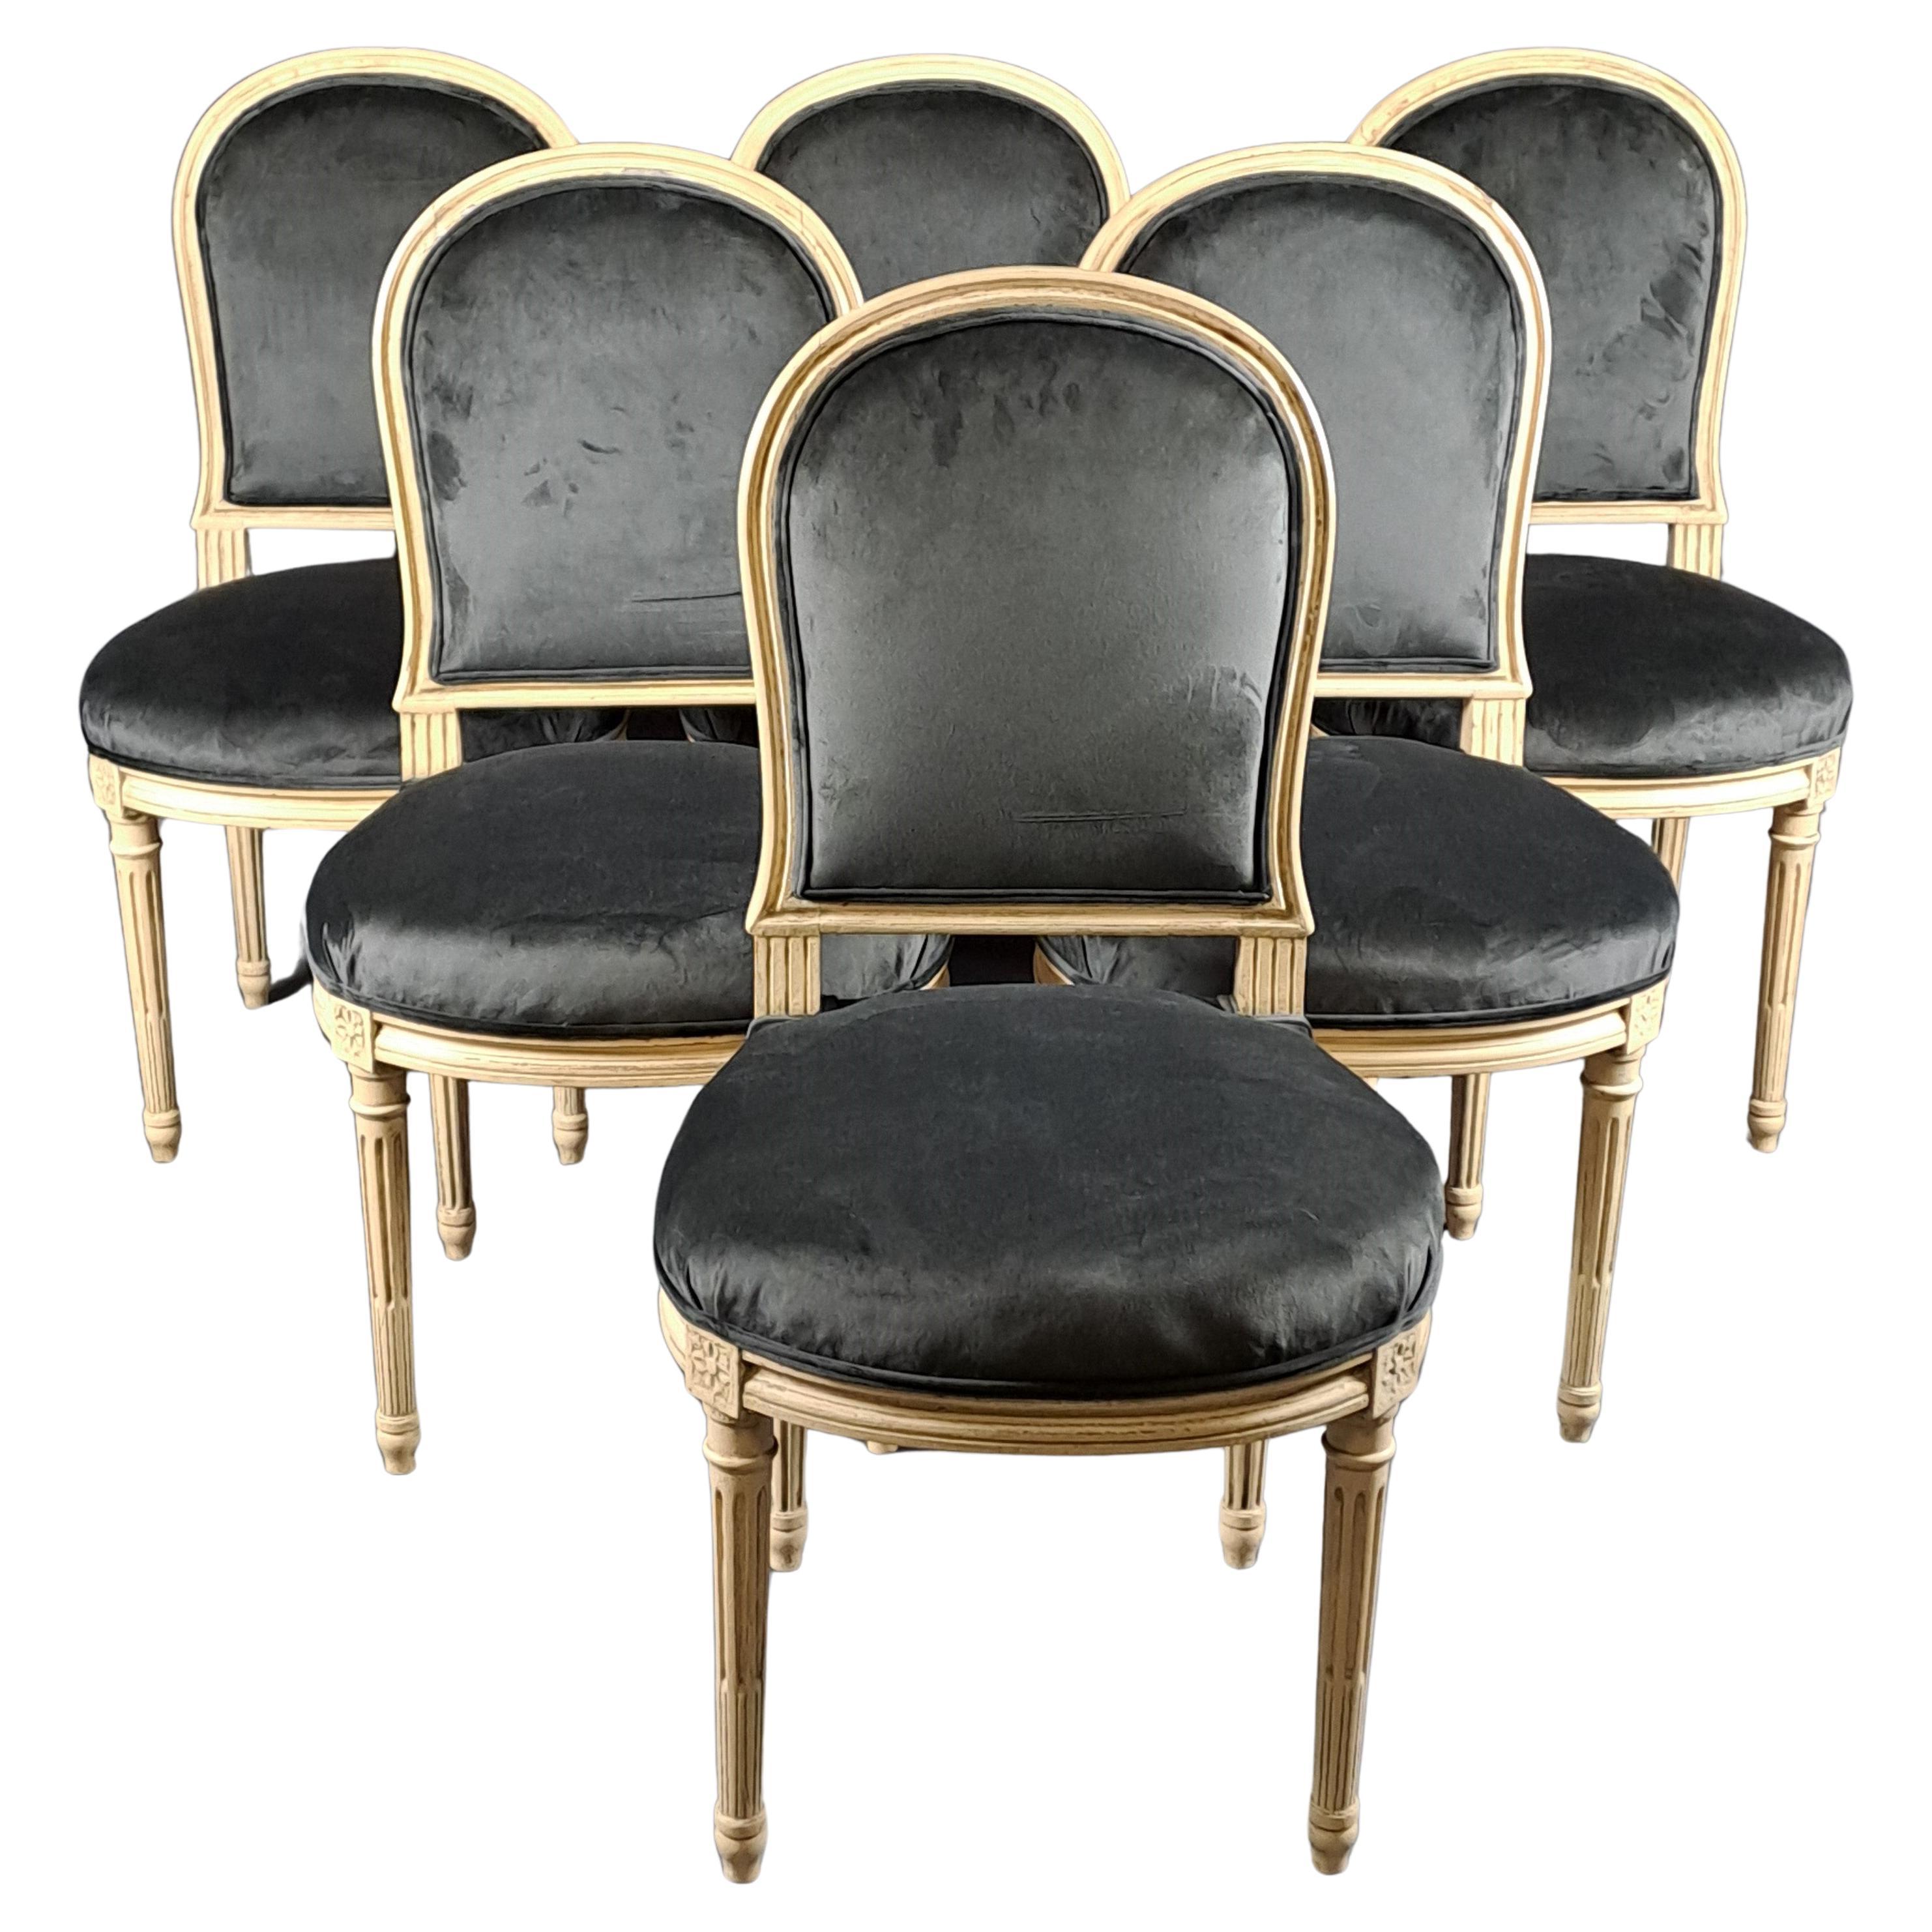 Suite Of 6 Louis XVI Style Chairs In Lacquered Wood After A Model By Jacob For Sale